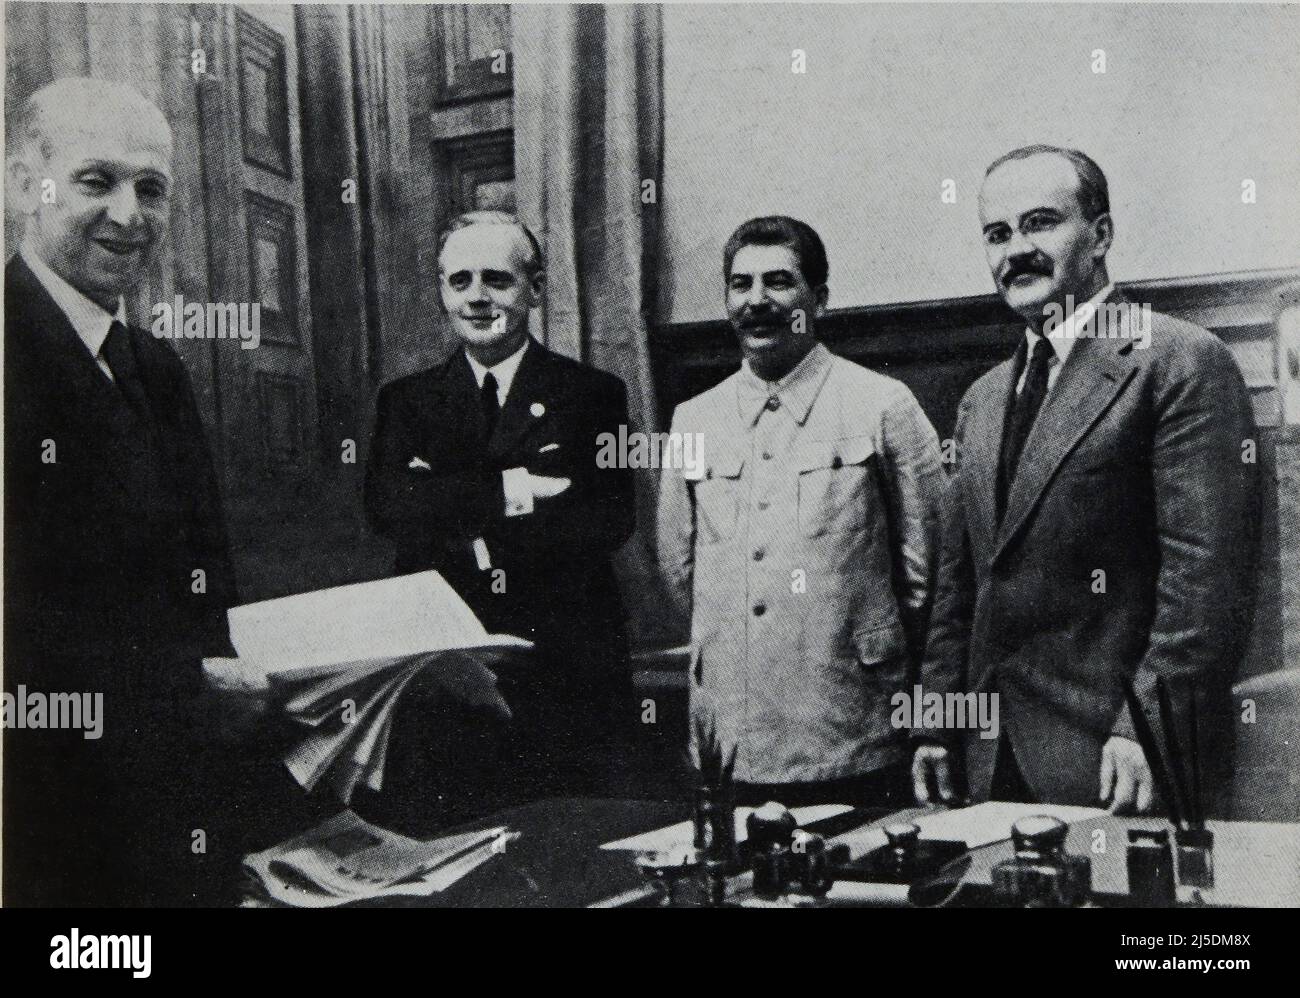 Eng translation : " The signing of the German-Soviet non-aggression pact. From right to left: Messrs. Molotov, Stalin, von Ribbentrop and Gaus  " - Original in french : " La signature du pacte de non-agression germano-soviétique. De droite à gauche : MM. Molotov, Staline, von Ribbentrop et Gaus " - Extract from "L'Illustration Journal Universel" - French illustrated magazine - 1939 Stock Photo